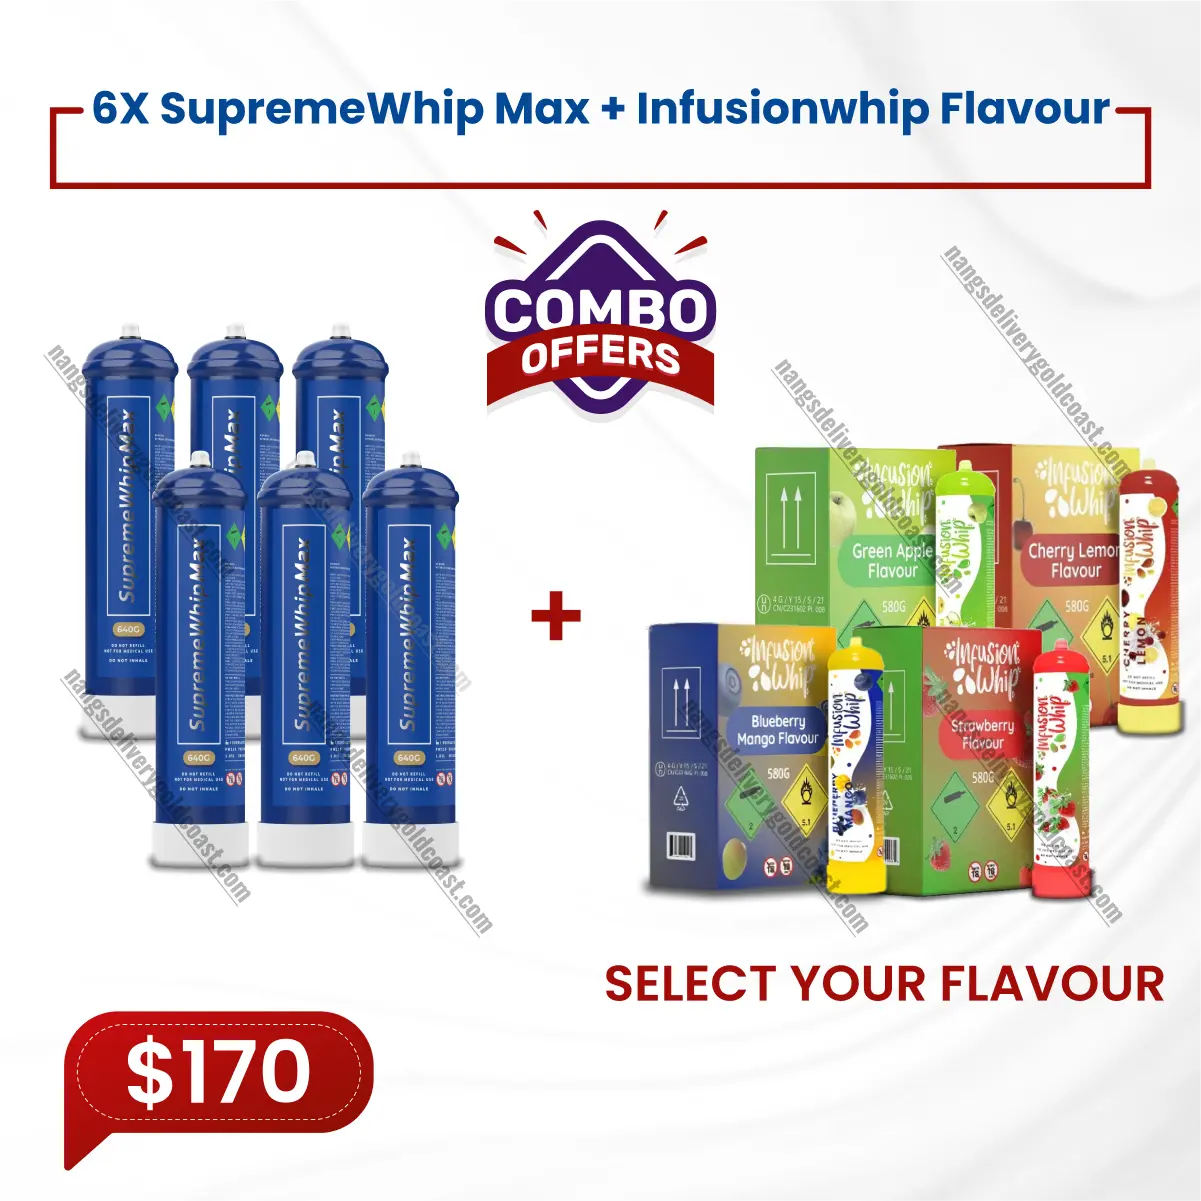 6X SupremeWhip Max + Infusionwhip Flavour